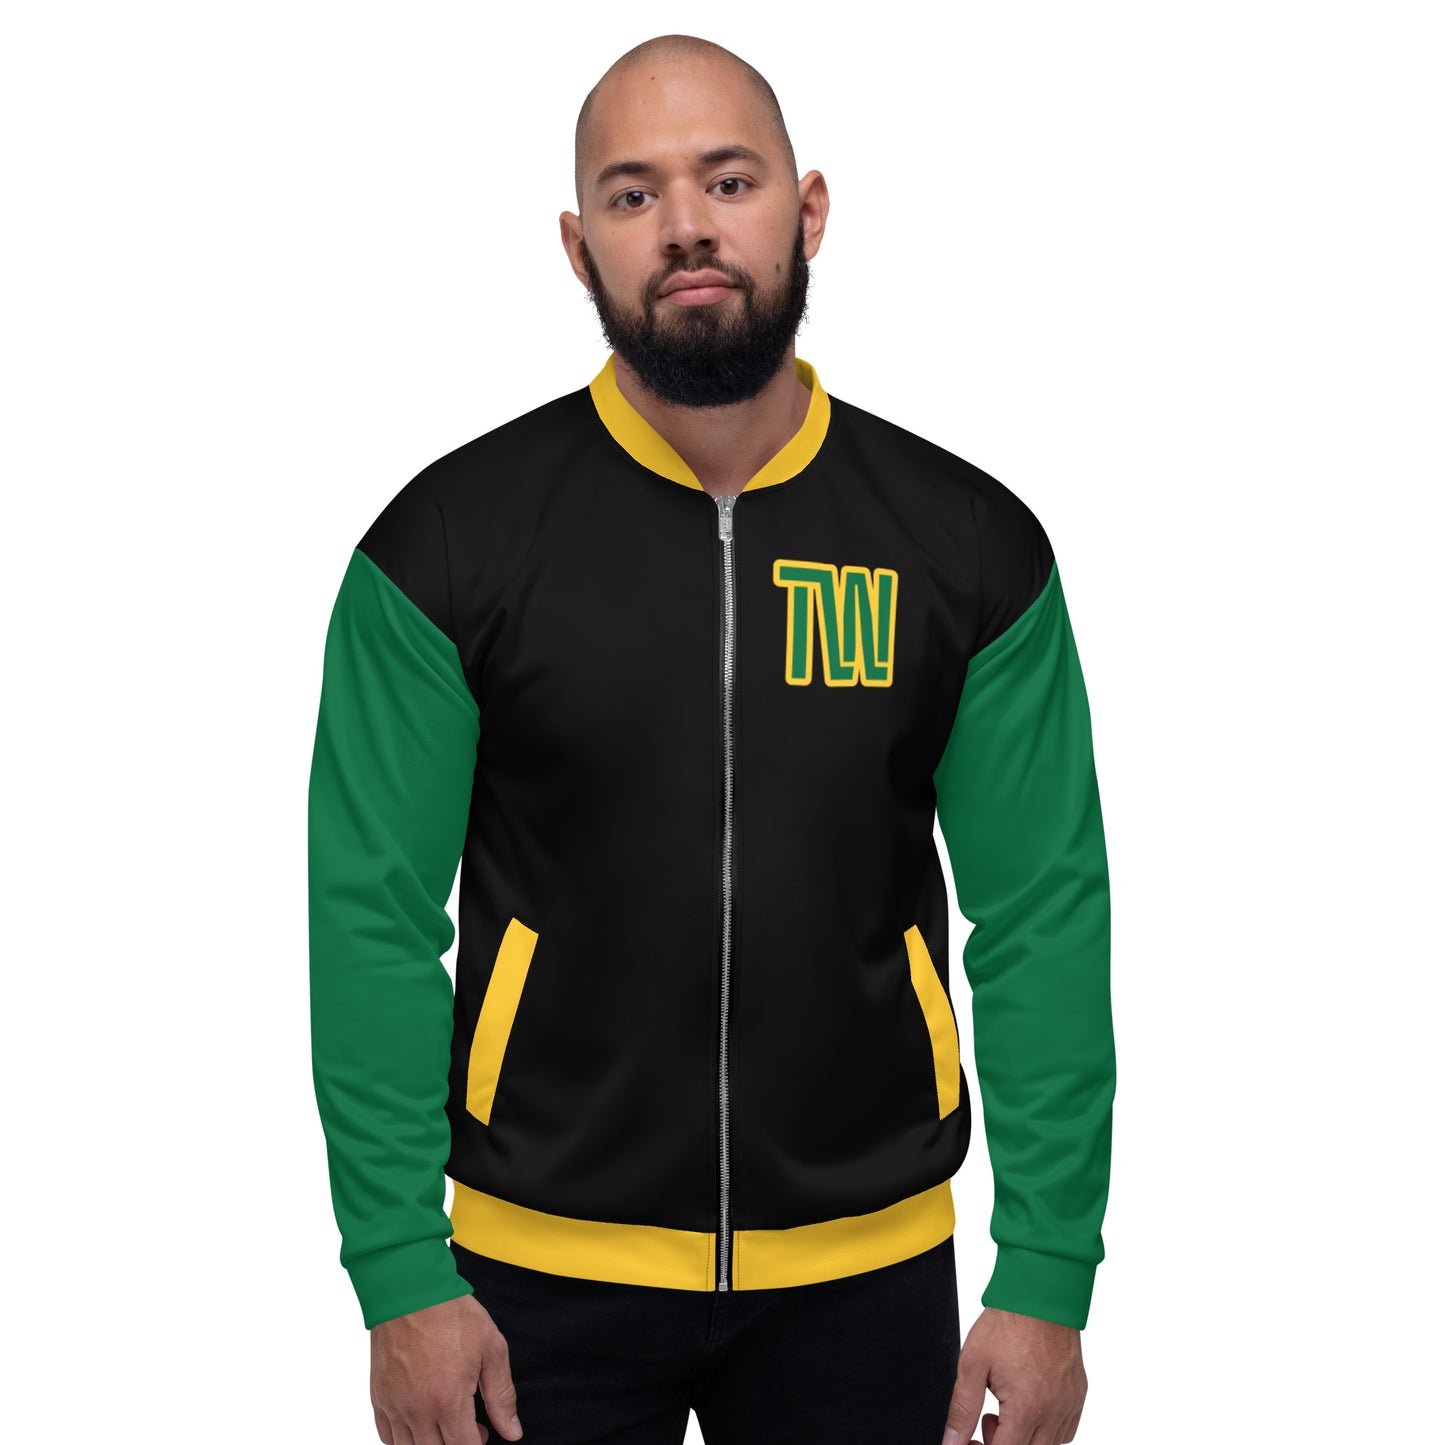 TW Bomber Jacket: Black, Yellow, and Green Statement Piece